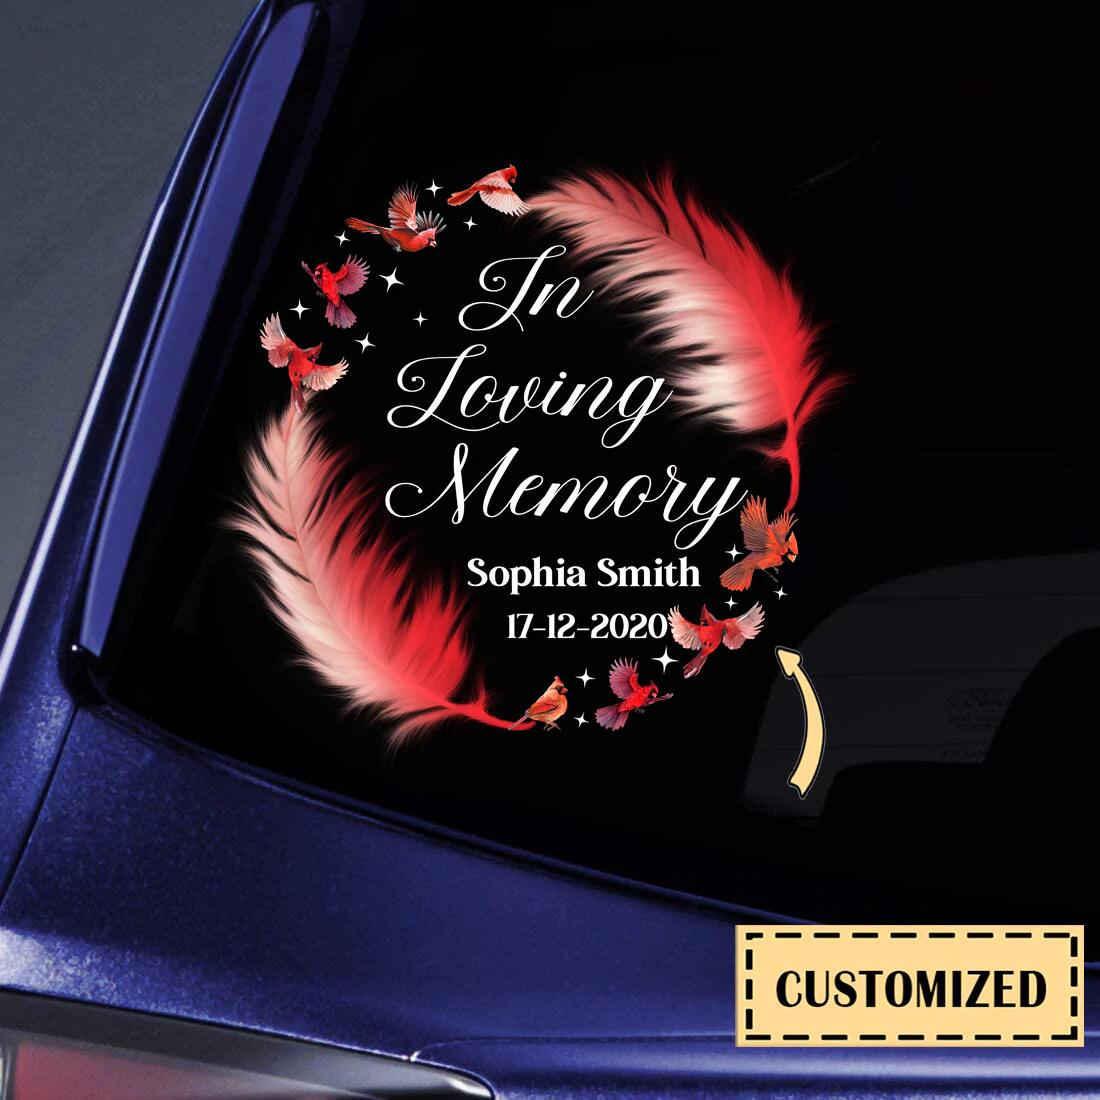 In Loving Memory Personalized Car Sticker